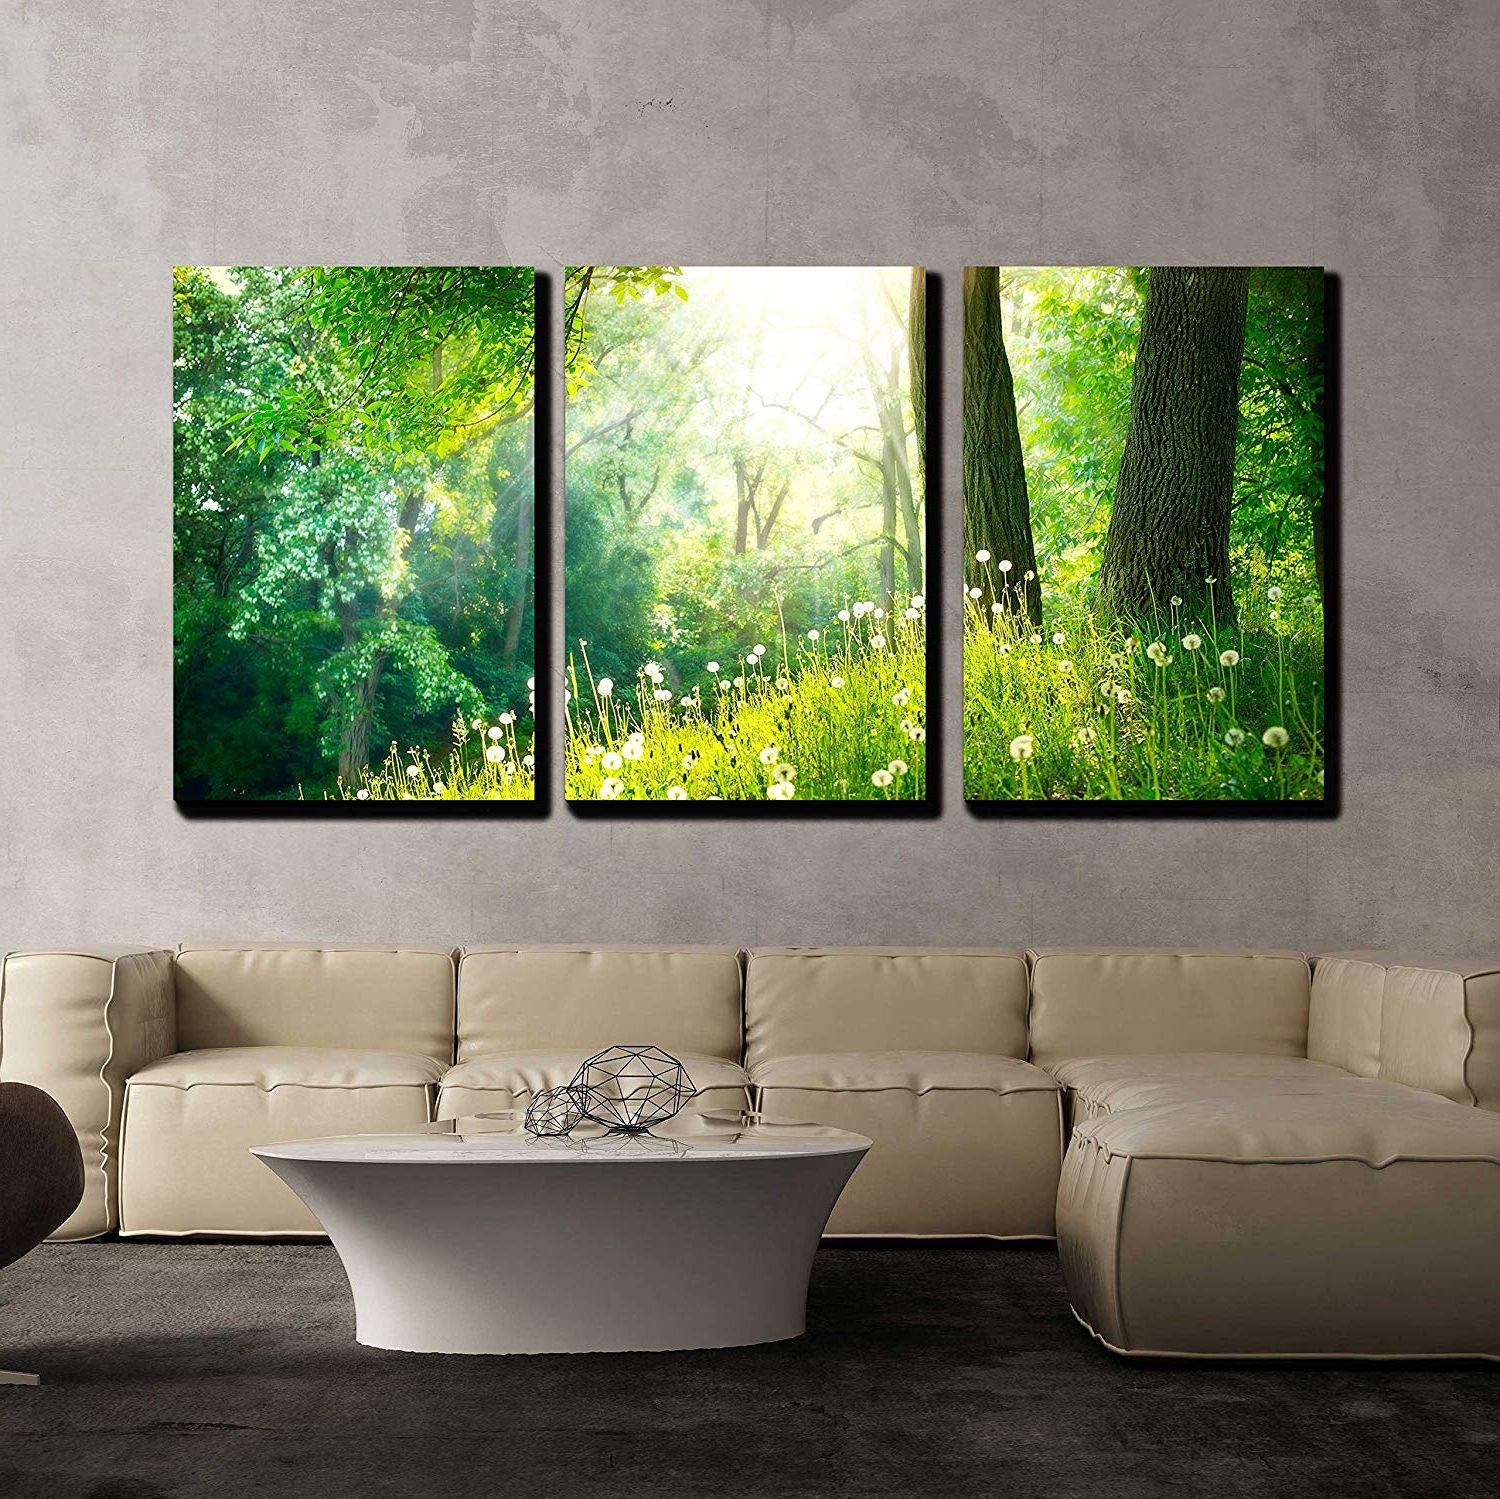 Wall26 3 Piece Canvas Wall Art – Spring Nature Beautiful Inside Well Known Natural Framed Art Prints (View 7 of 20)